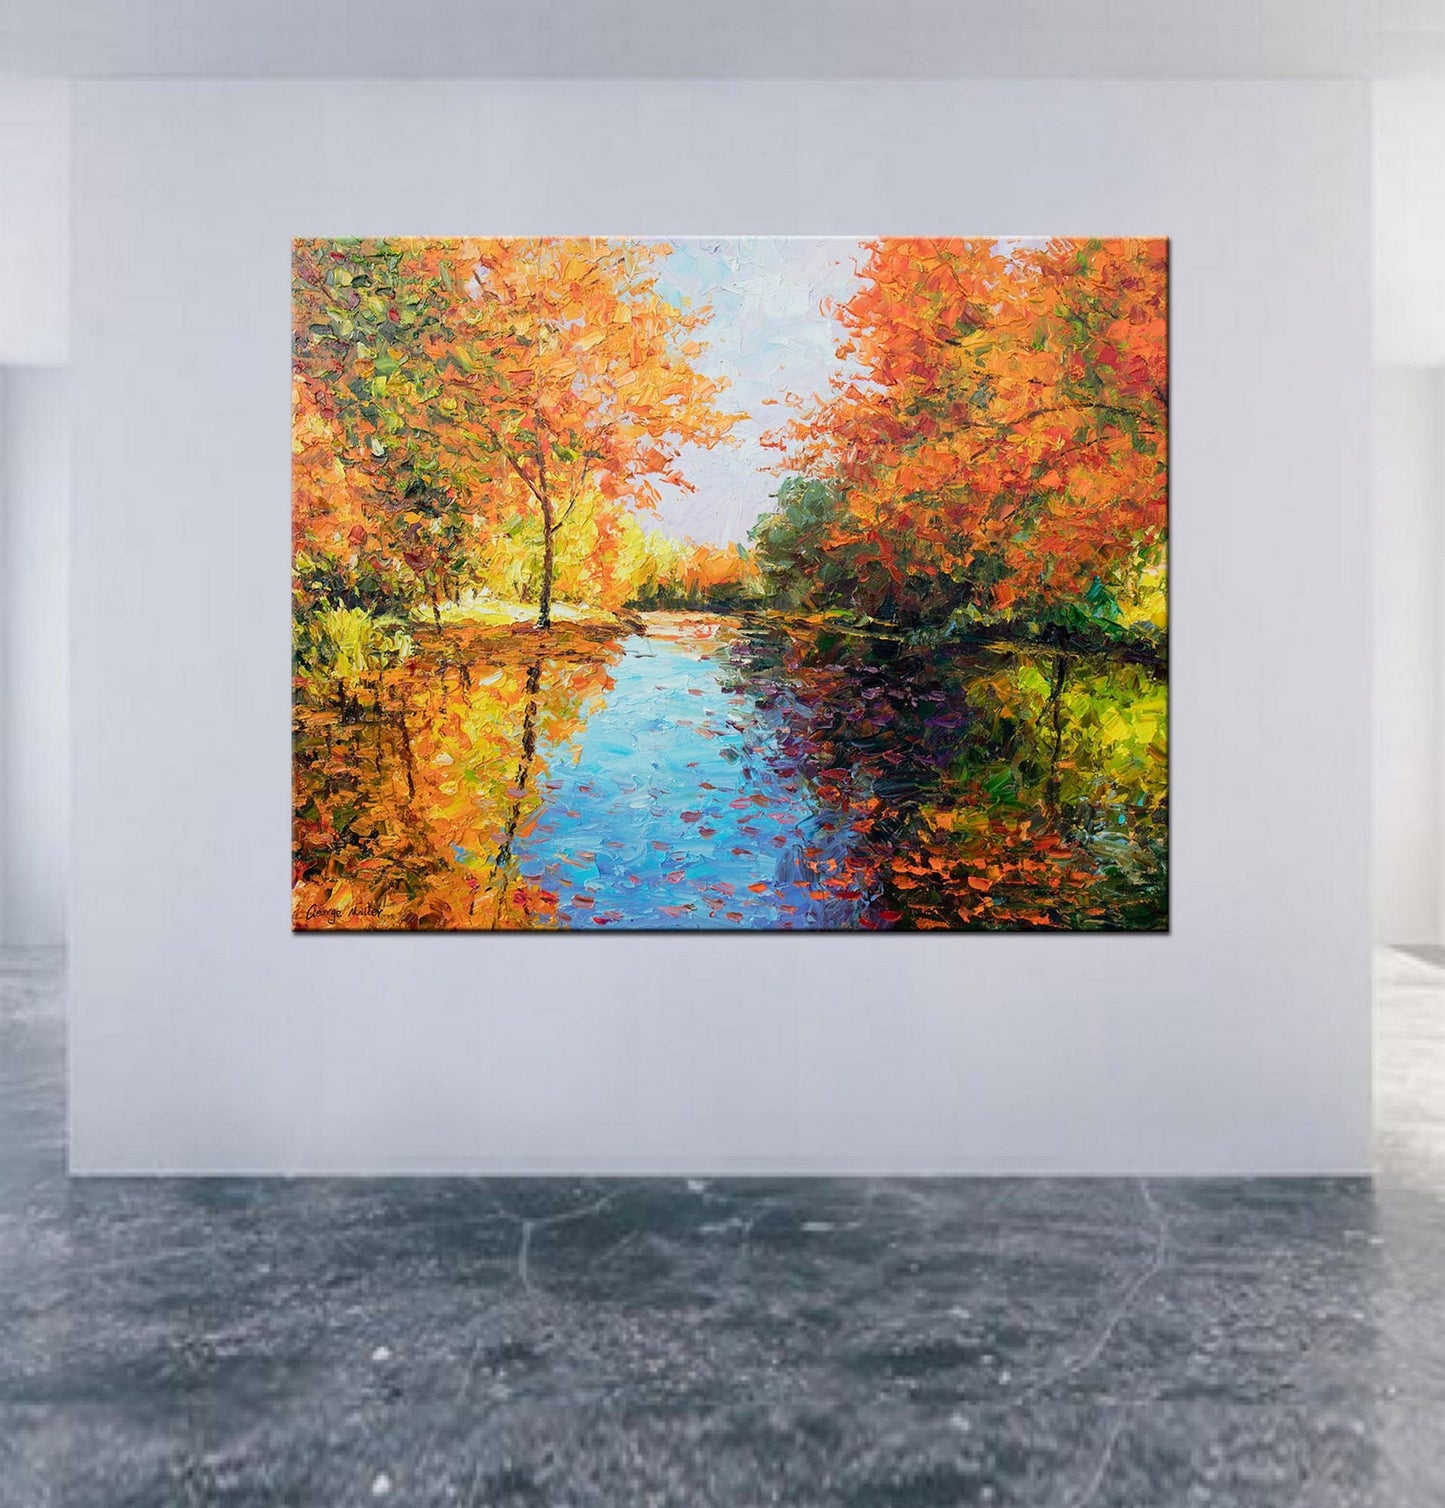 Landscape Painting, Abstract Oil Painting, Canvas Painting, Large Wall Decor, Original Painting, Large Abstract Painting, Autumn Forest Art